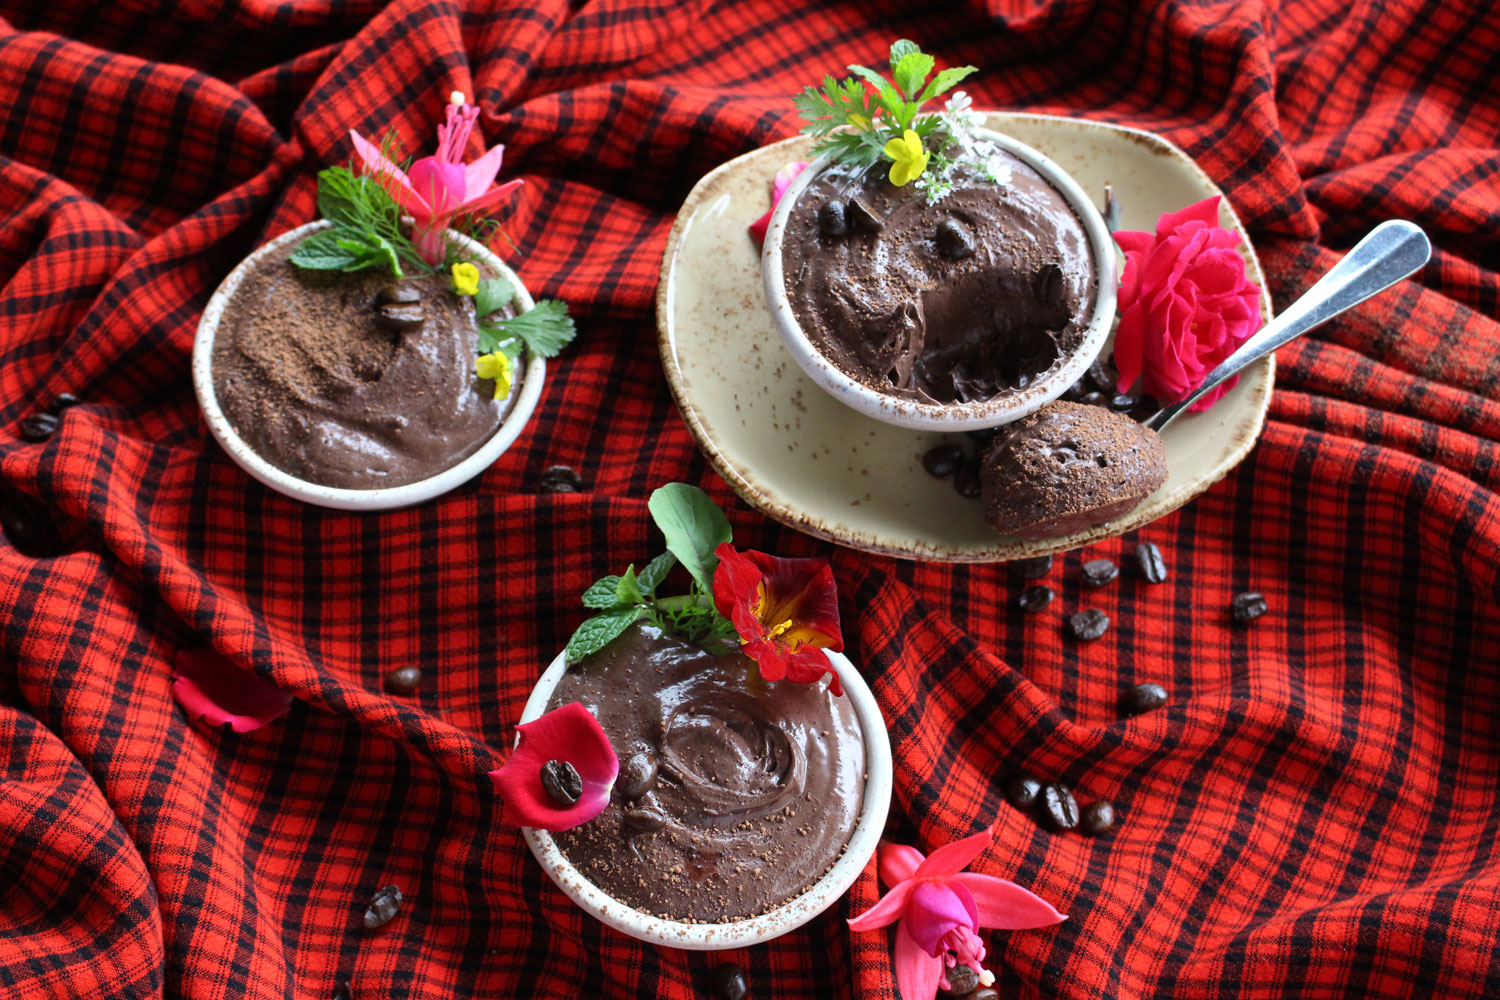 Our Coffee Chocolate Mousse is a delectable dessert combining two of our favourite ingredients: coffee and chocolate.